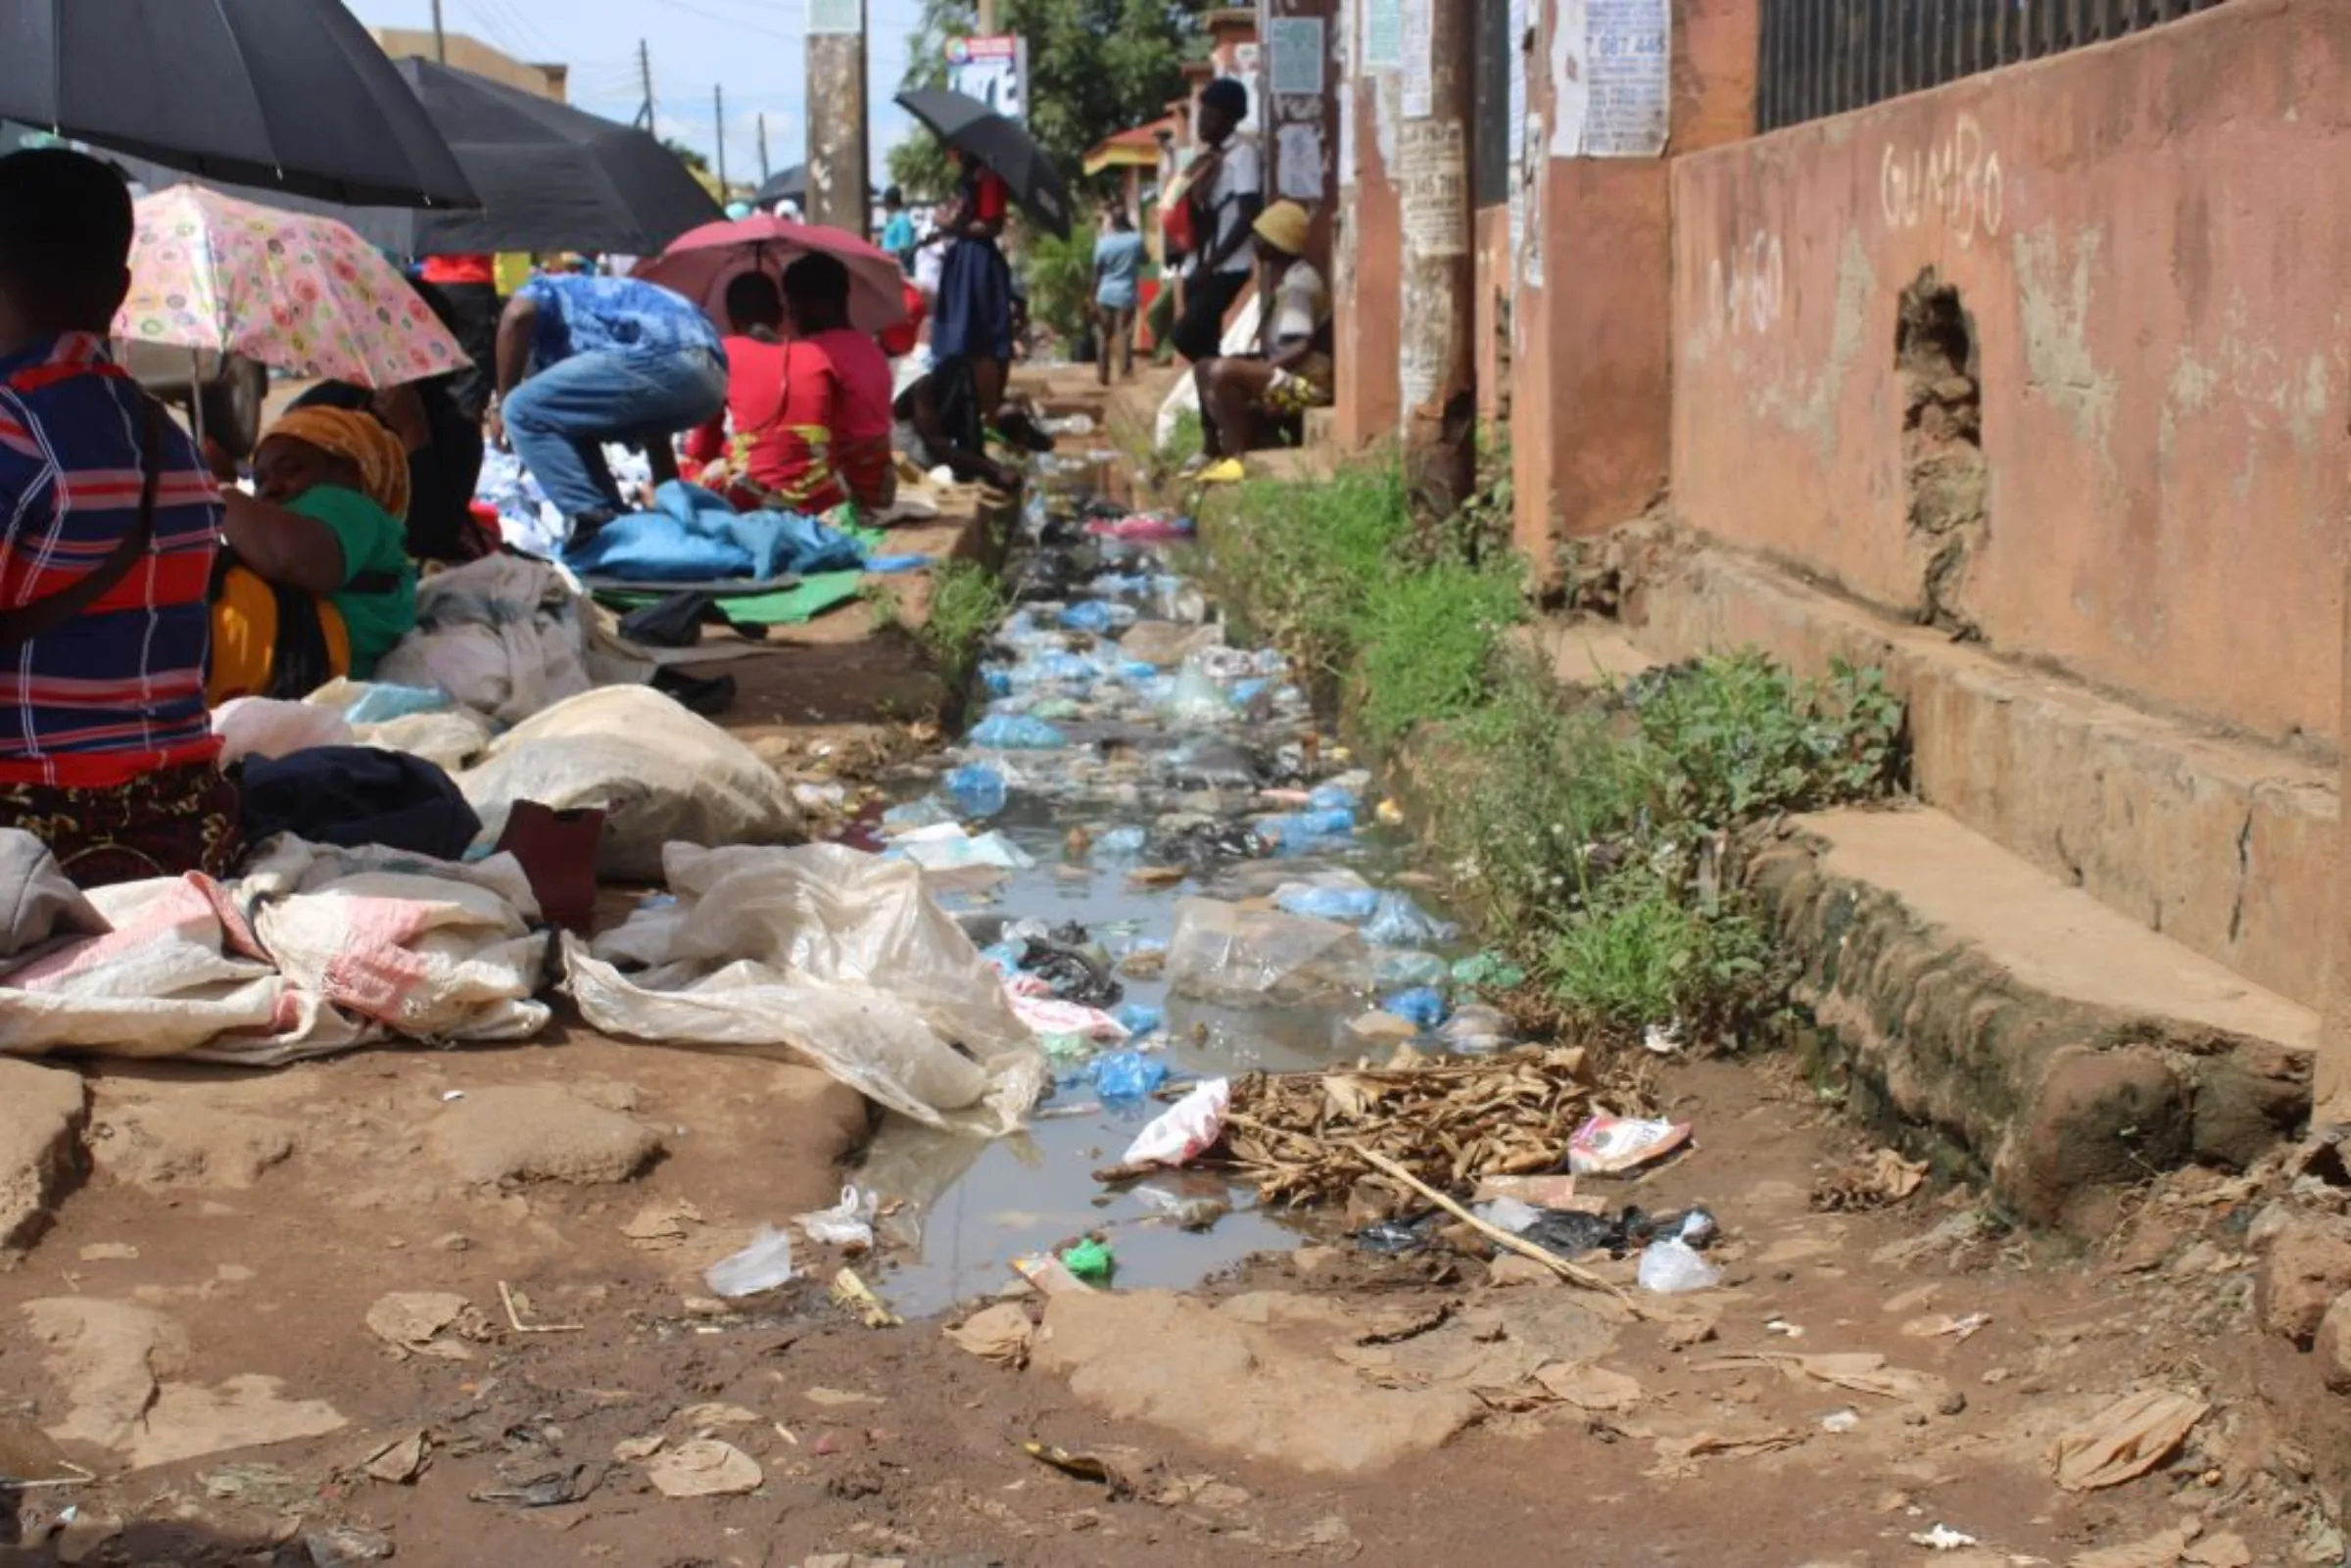 Vendors selling clothes and other merchandise in the city of Lilongwe, Malawi. Behind them is polluted water. Poor drainage facilities is one of the problems in the cities. January 11, 2023